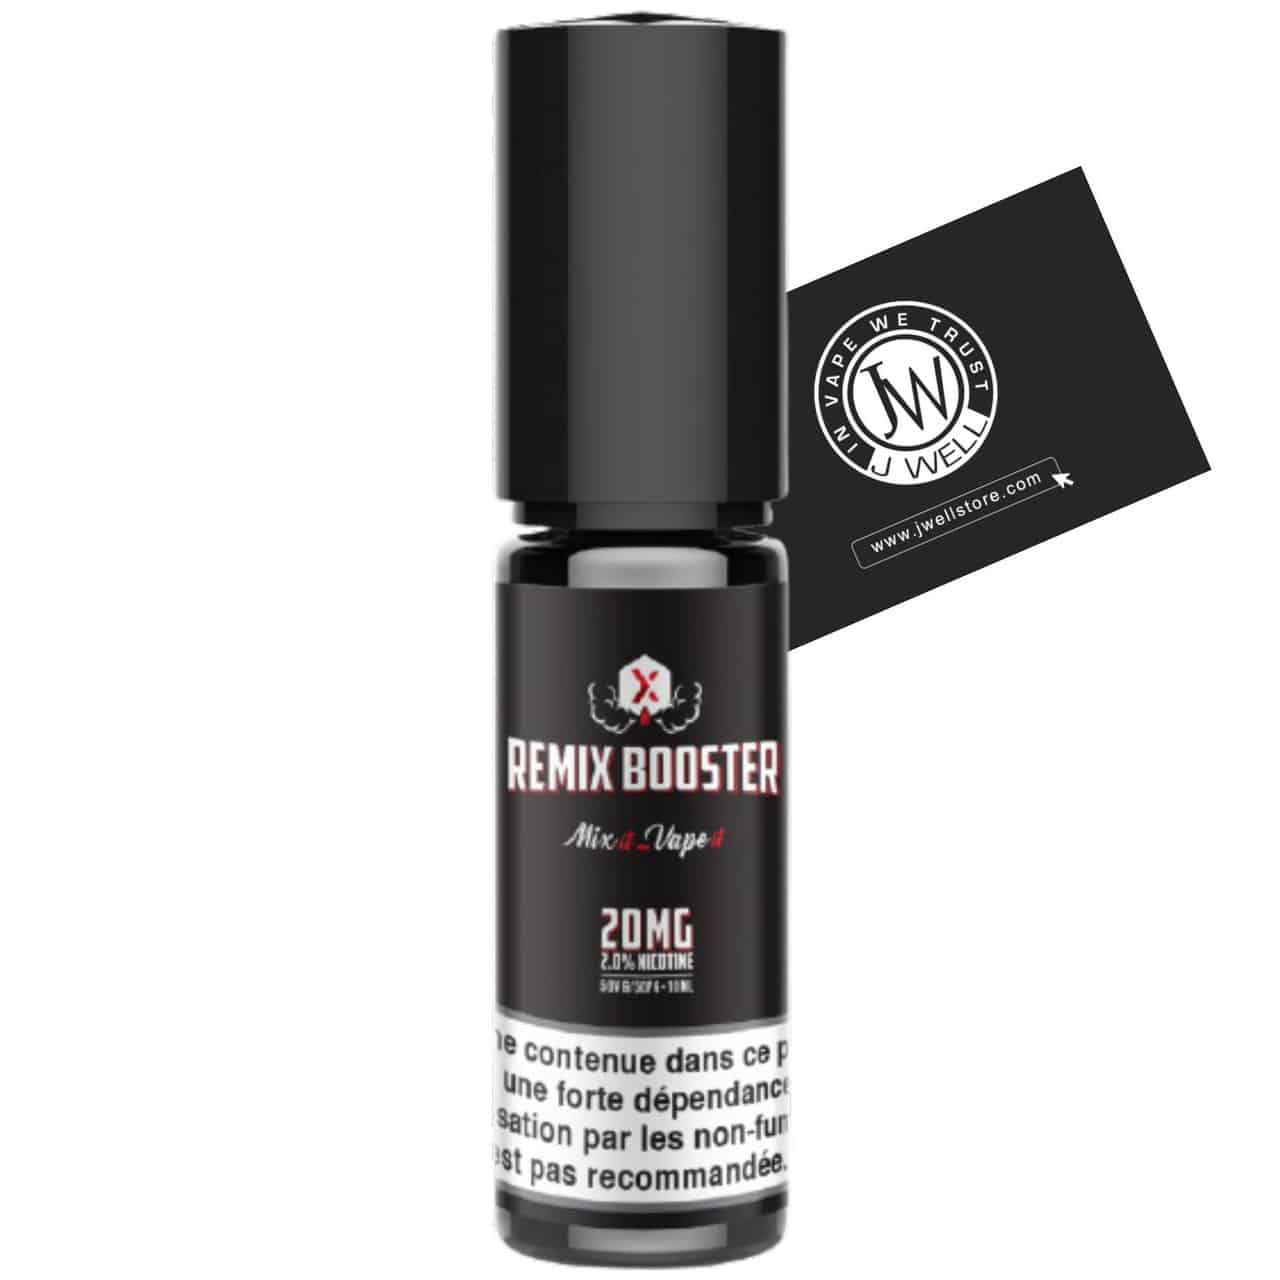 Image Booster aux Sels de Nicotine Remix Booster